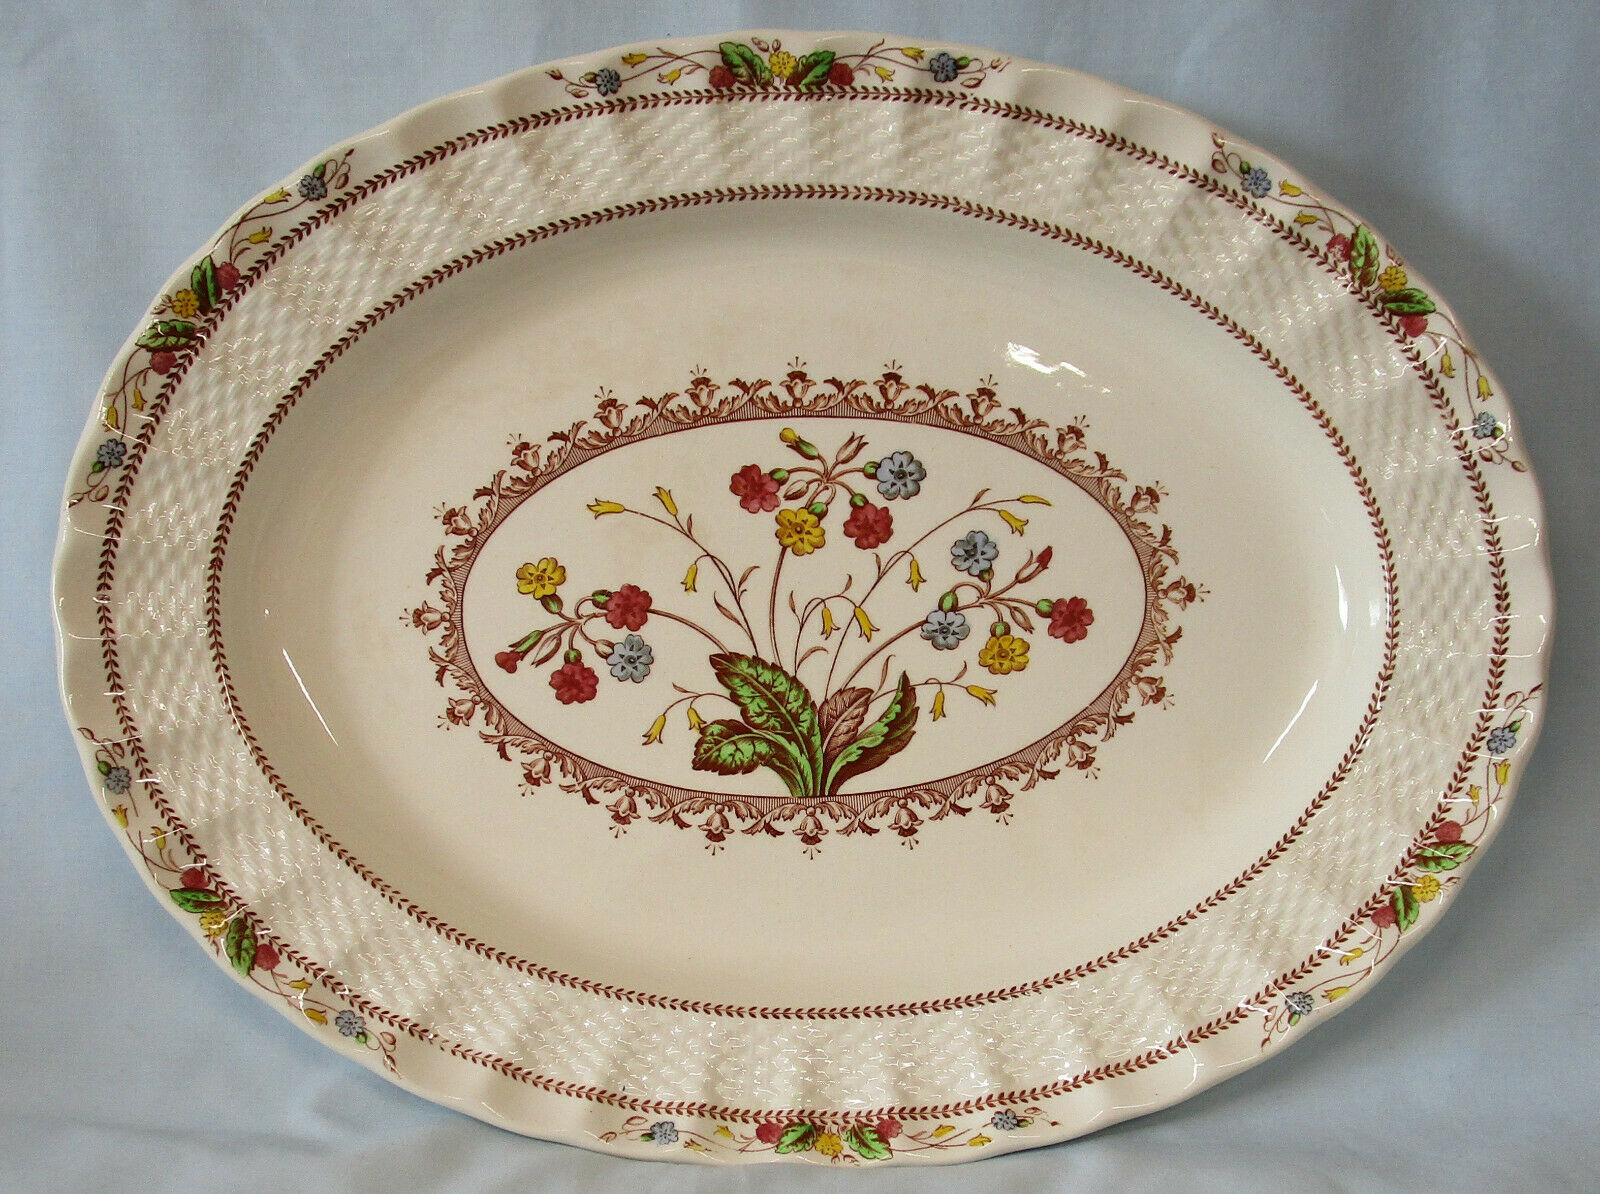 Primary image for Spode Cowslip S713 Oval Platter 13" by 10" USED